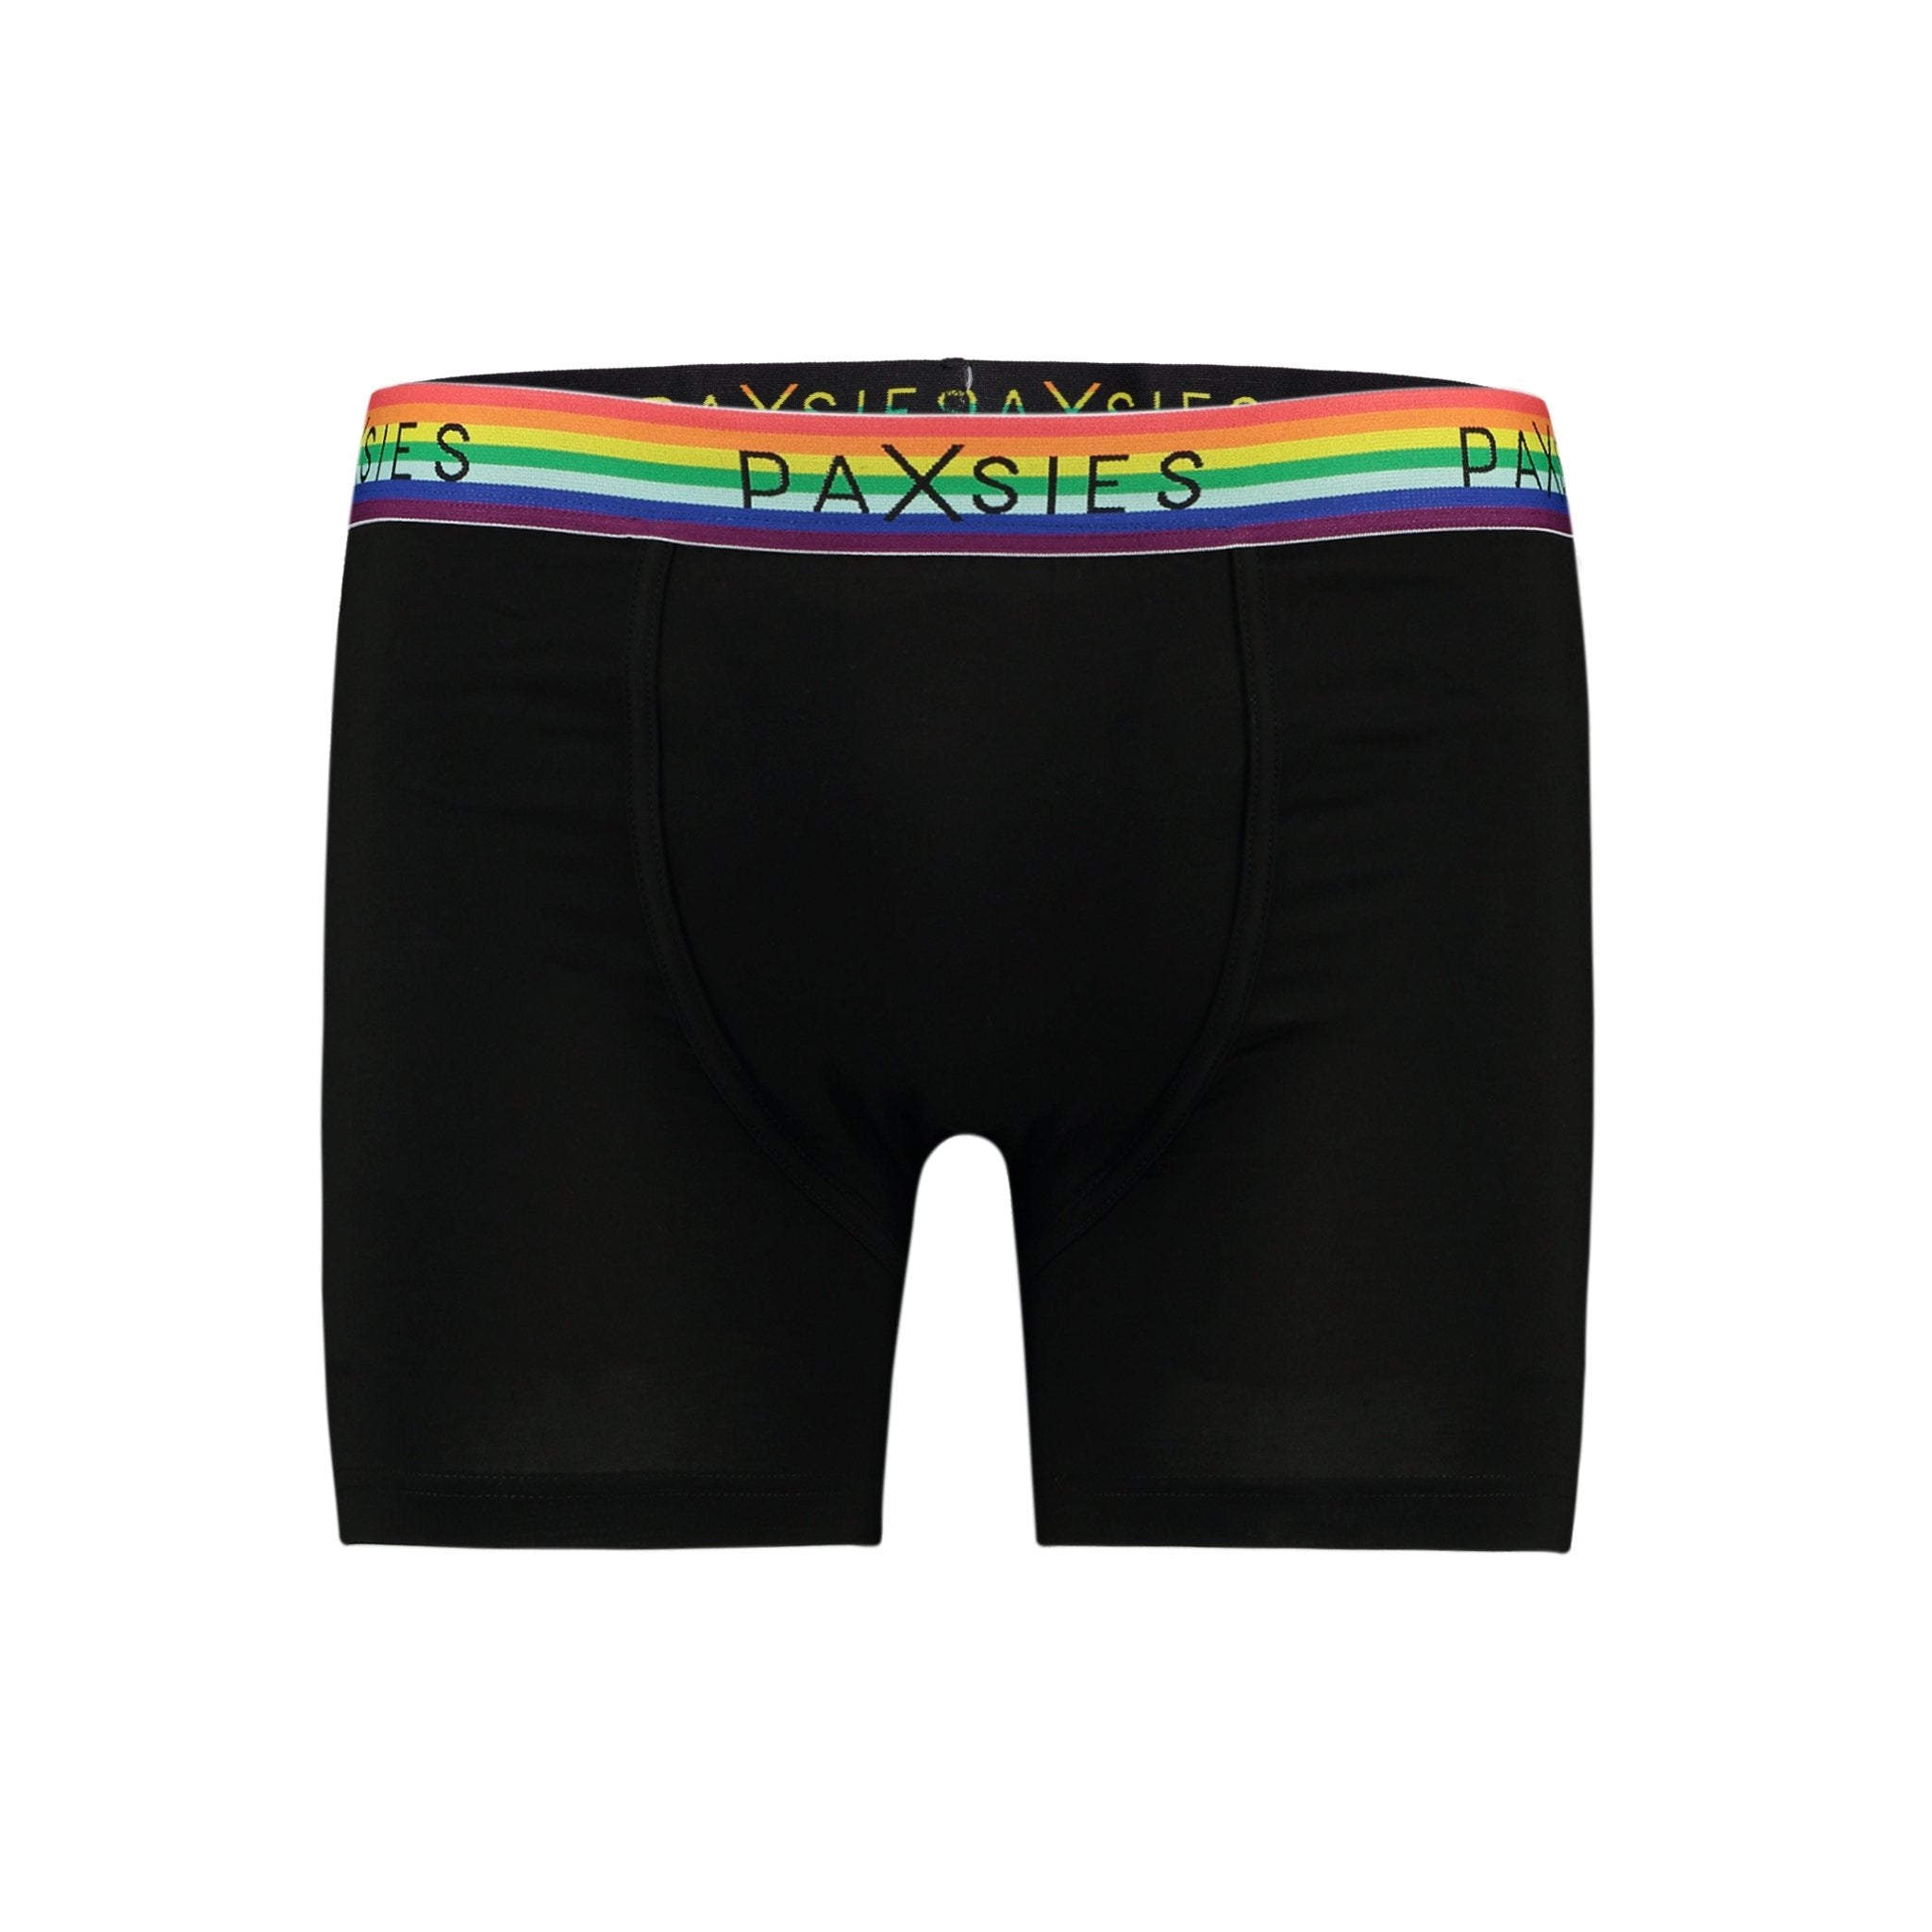 Pride Grey All-in-One Packing Boxers